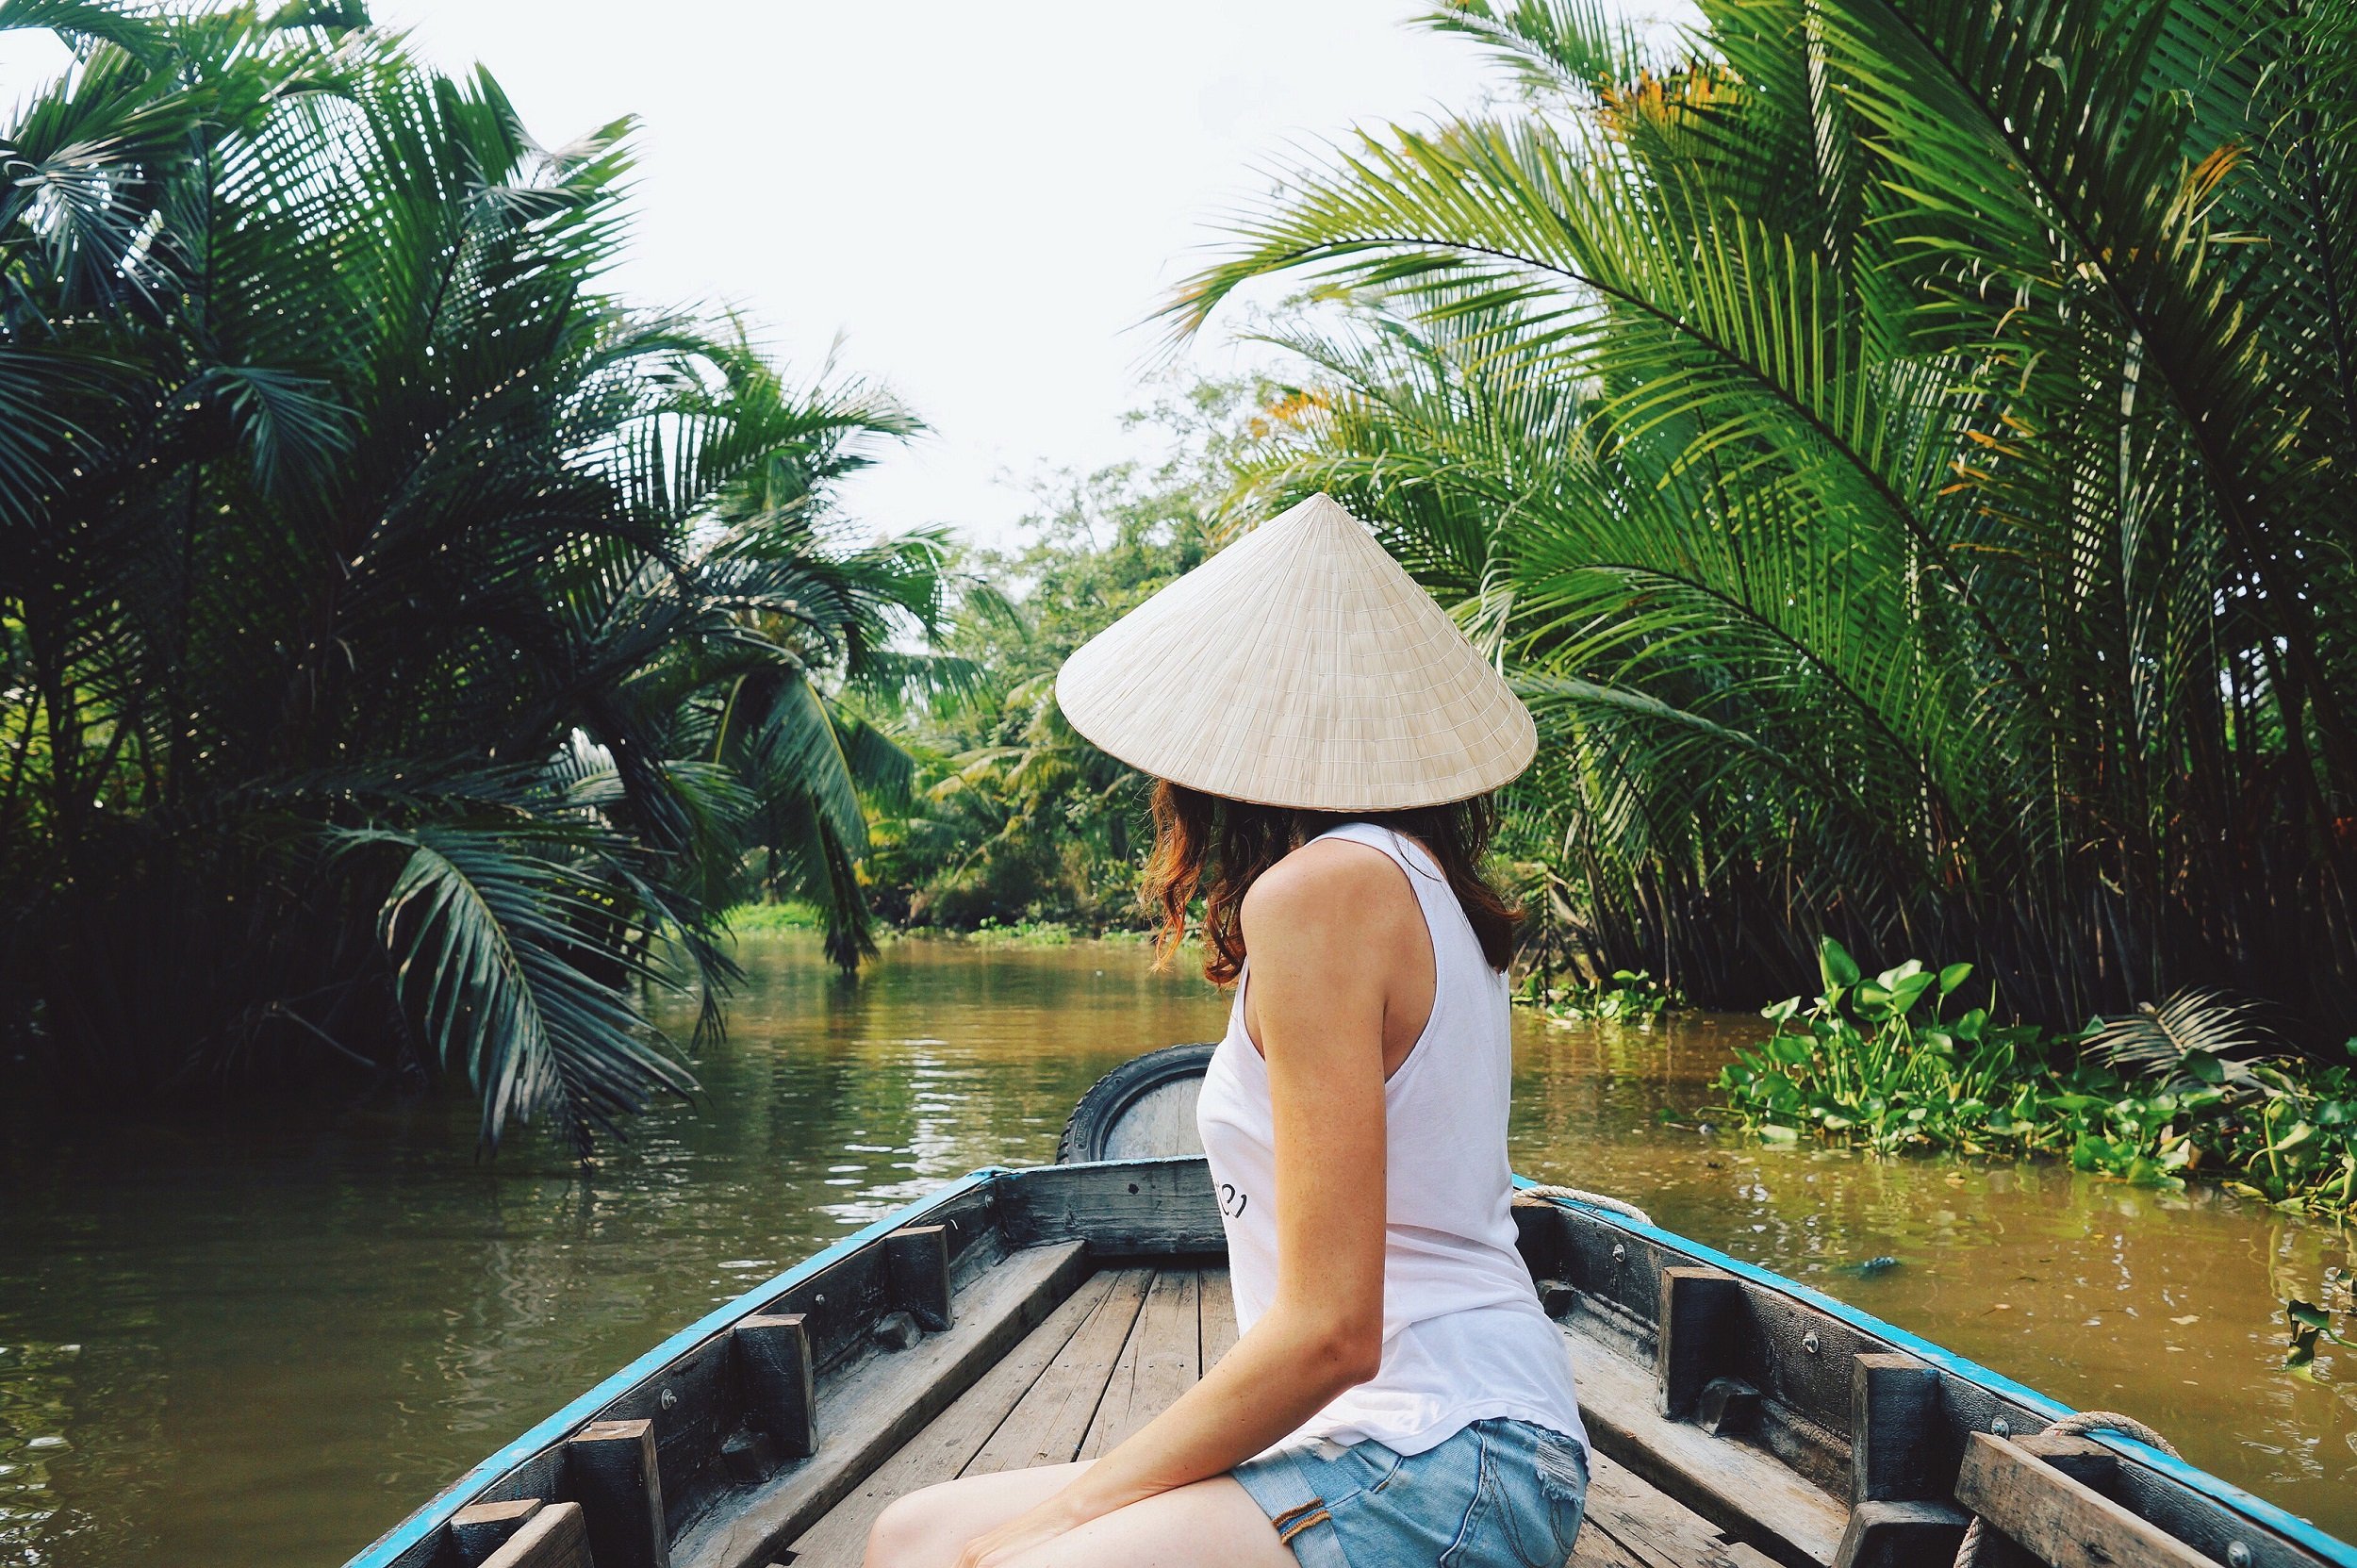 Explore The Famous Mekong Delta On The Wonders Of Vietnam, Cambodia & Thailand 15 Day Package Tour